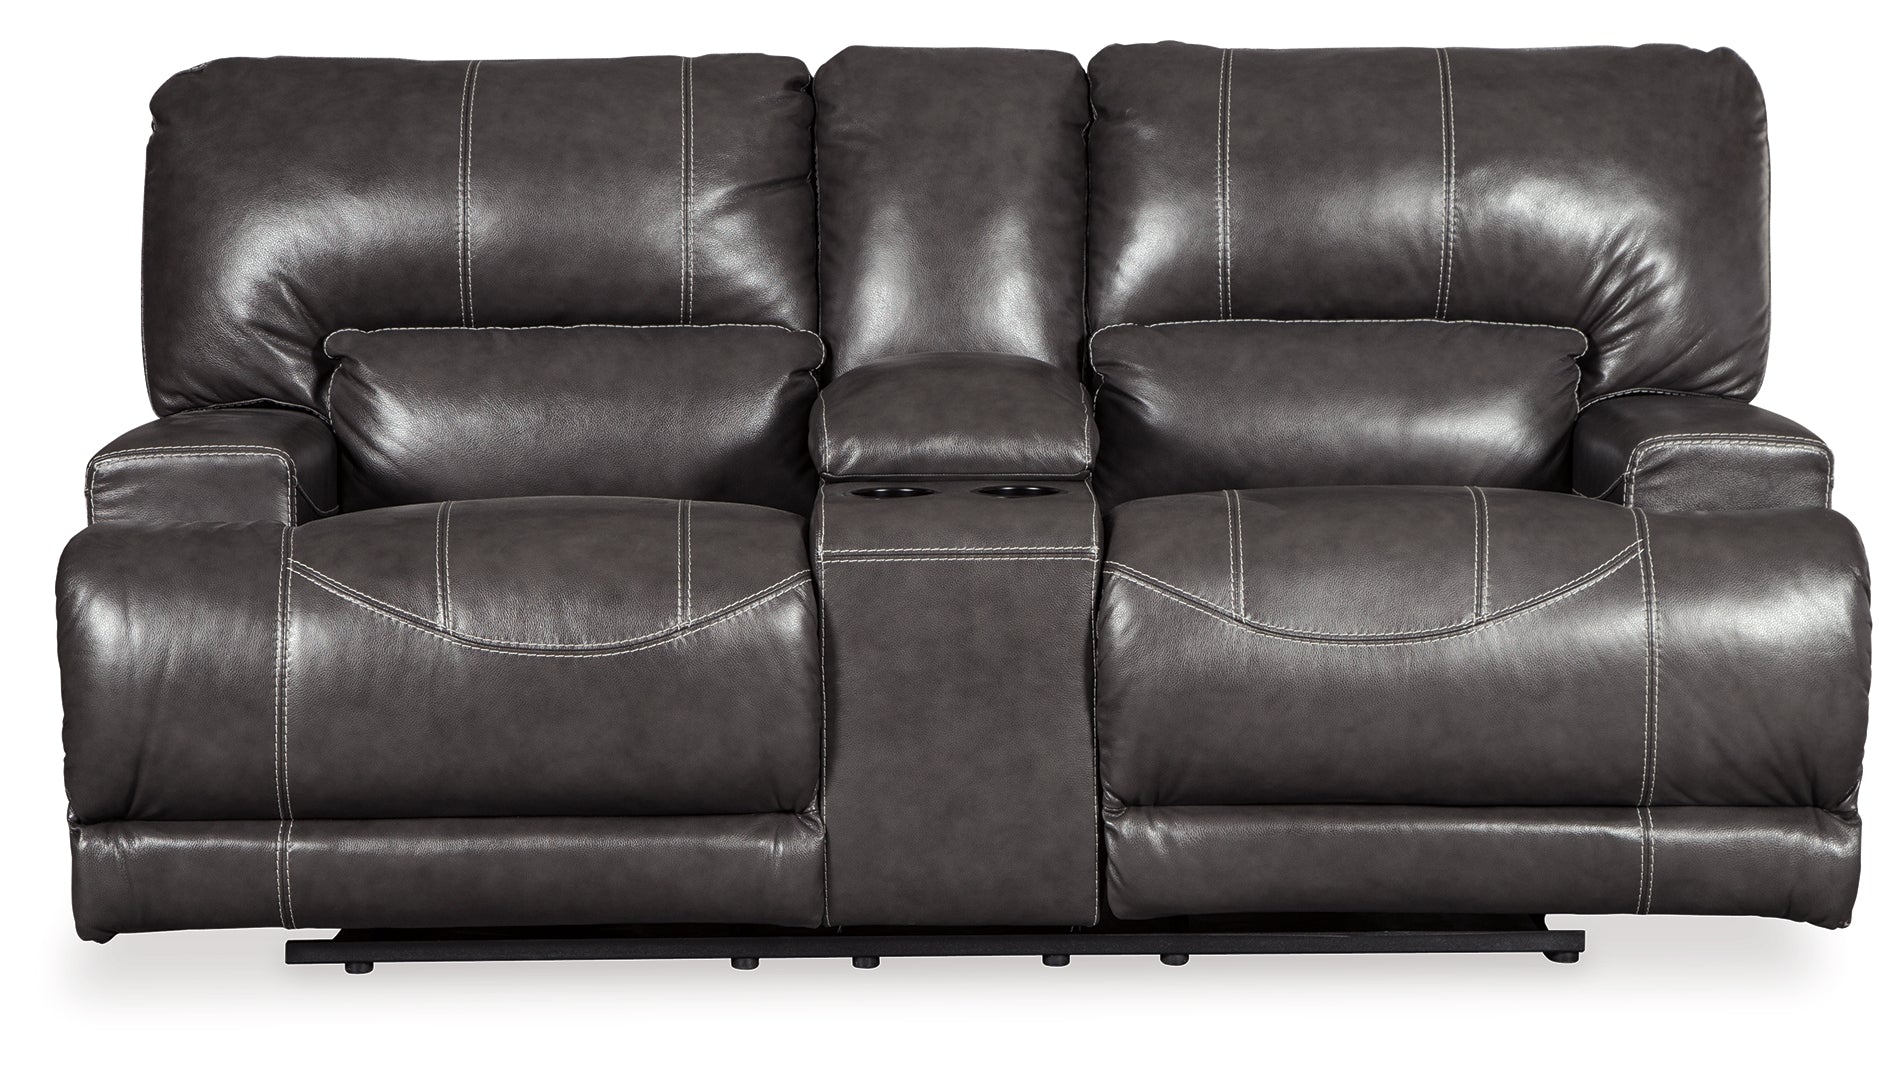 McCaskill Reclining Loveseat with Console